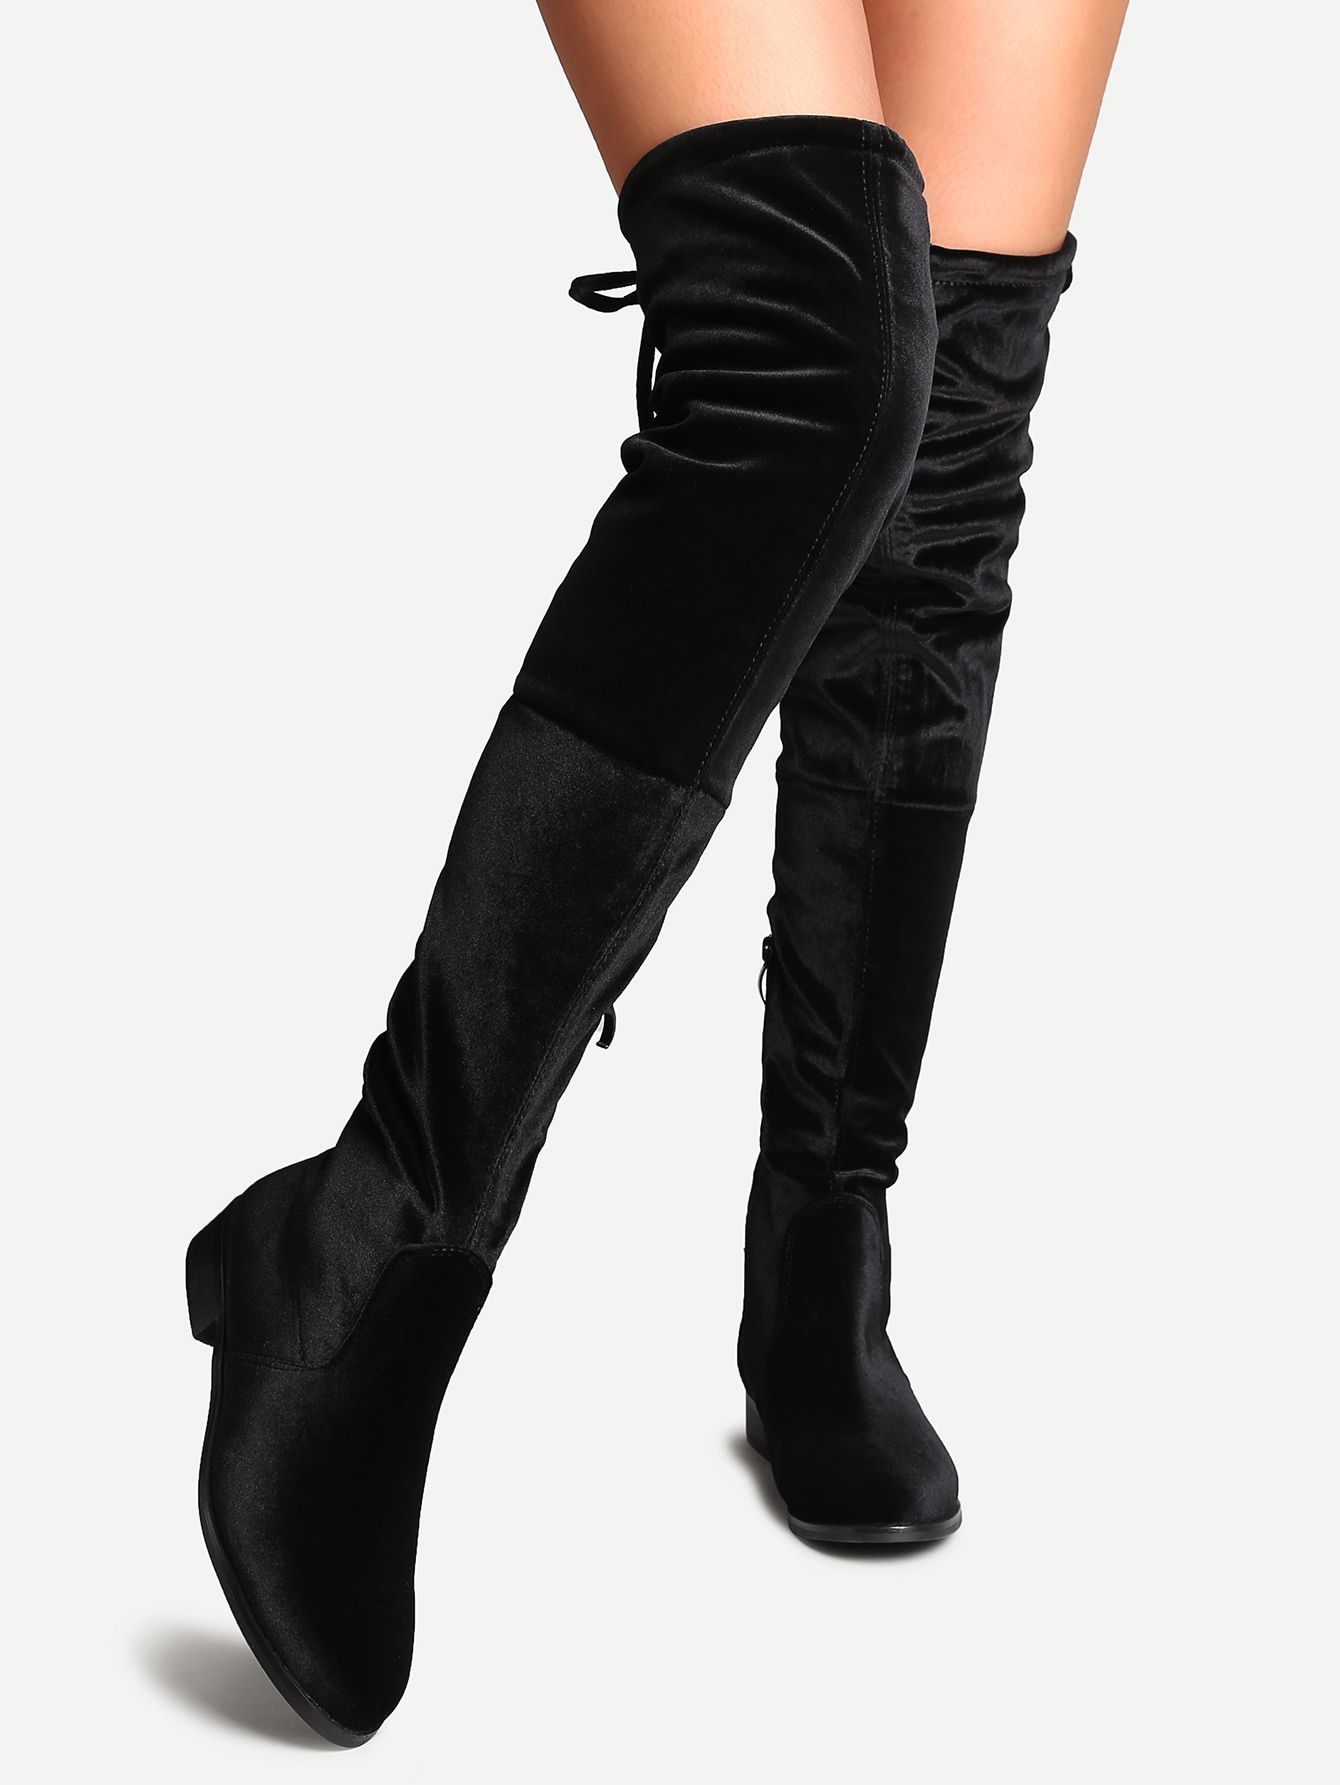 Black Faux Suede Side Zipper Tie Back Over The Knee Boots | SHEIN